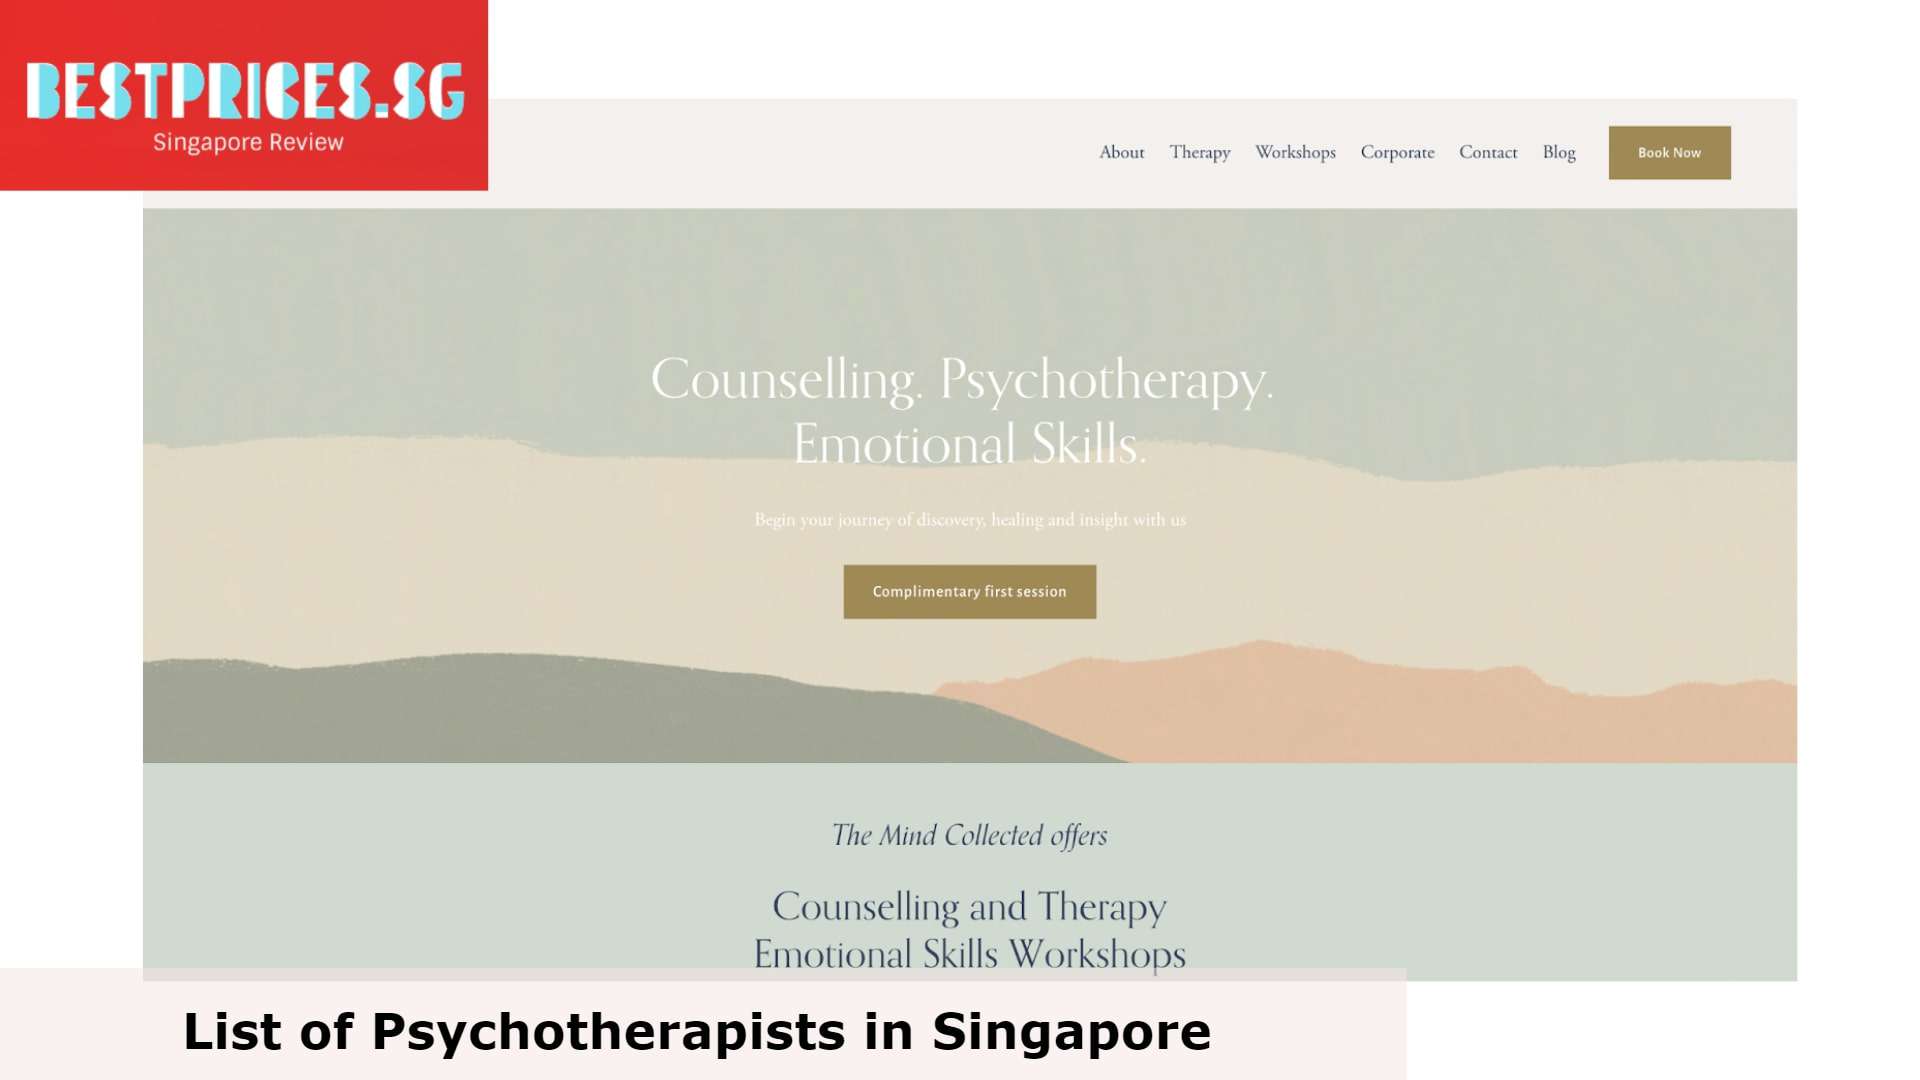 The Mind Collected - Psychotherapist Singapore, How do I become a psychotherapist in Singapore?, What is the difference between a psychologist and a psychotherapist?, Is psychotherapy regulated in Singapore?, Is it worth seeing a psychotherapist?, Who should visit a Psychotherapist?, What is Psychotherapy?, Best psychologist in Singapore, How much does a psychologist cost Singapore?, Is psychologist a doctor in Singapore?, Who is the best psychologist?, list of psychologists in singapore, psychologist in singapore salary, psychologist near me, 
private psychologist singapore, affordable psychologist singapore, 